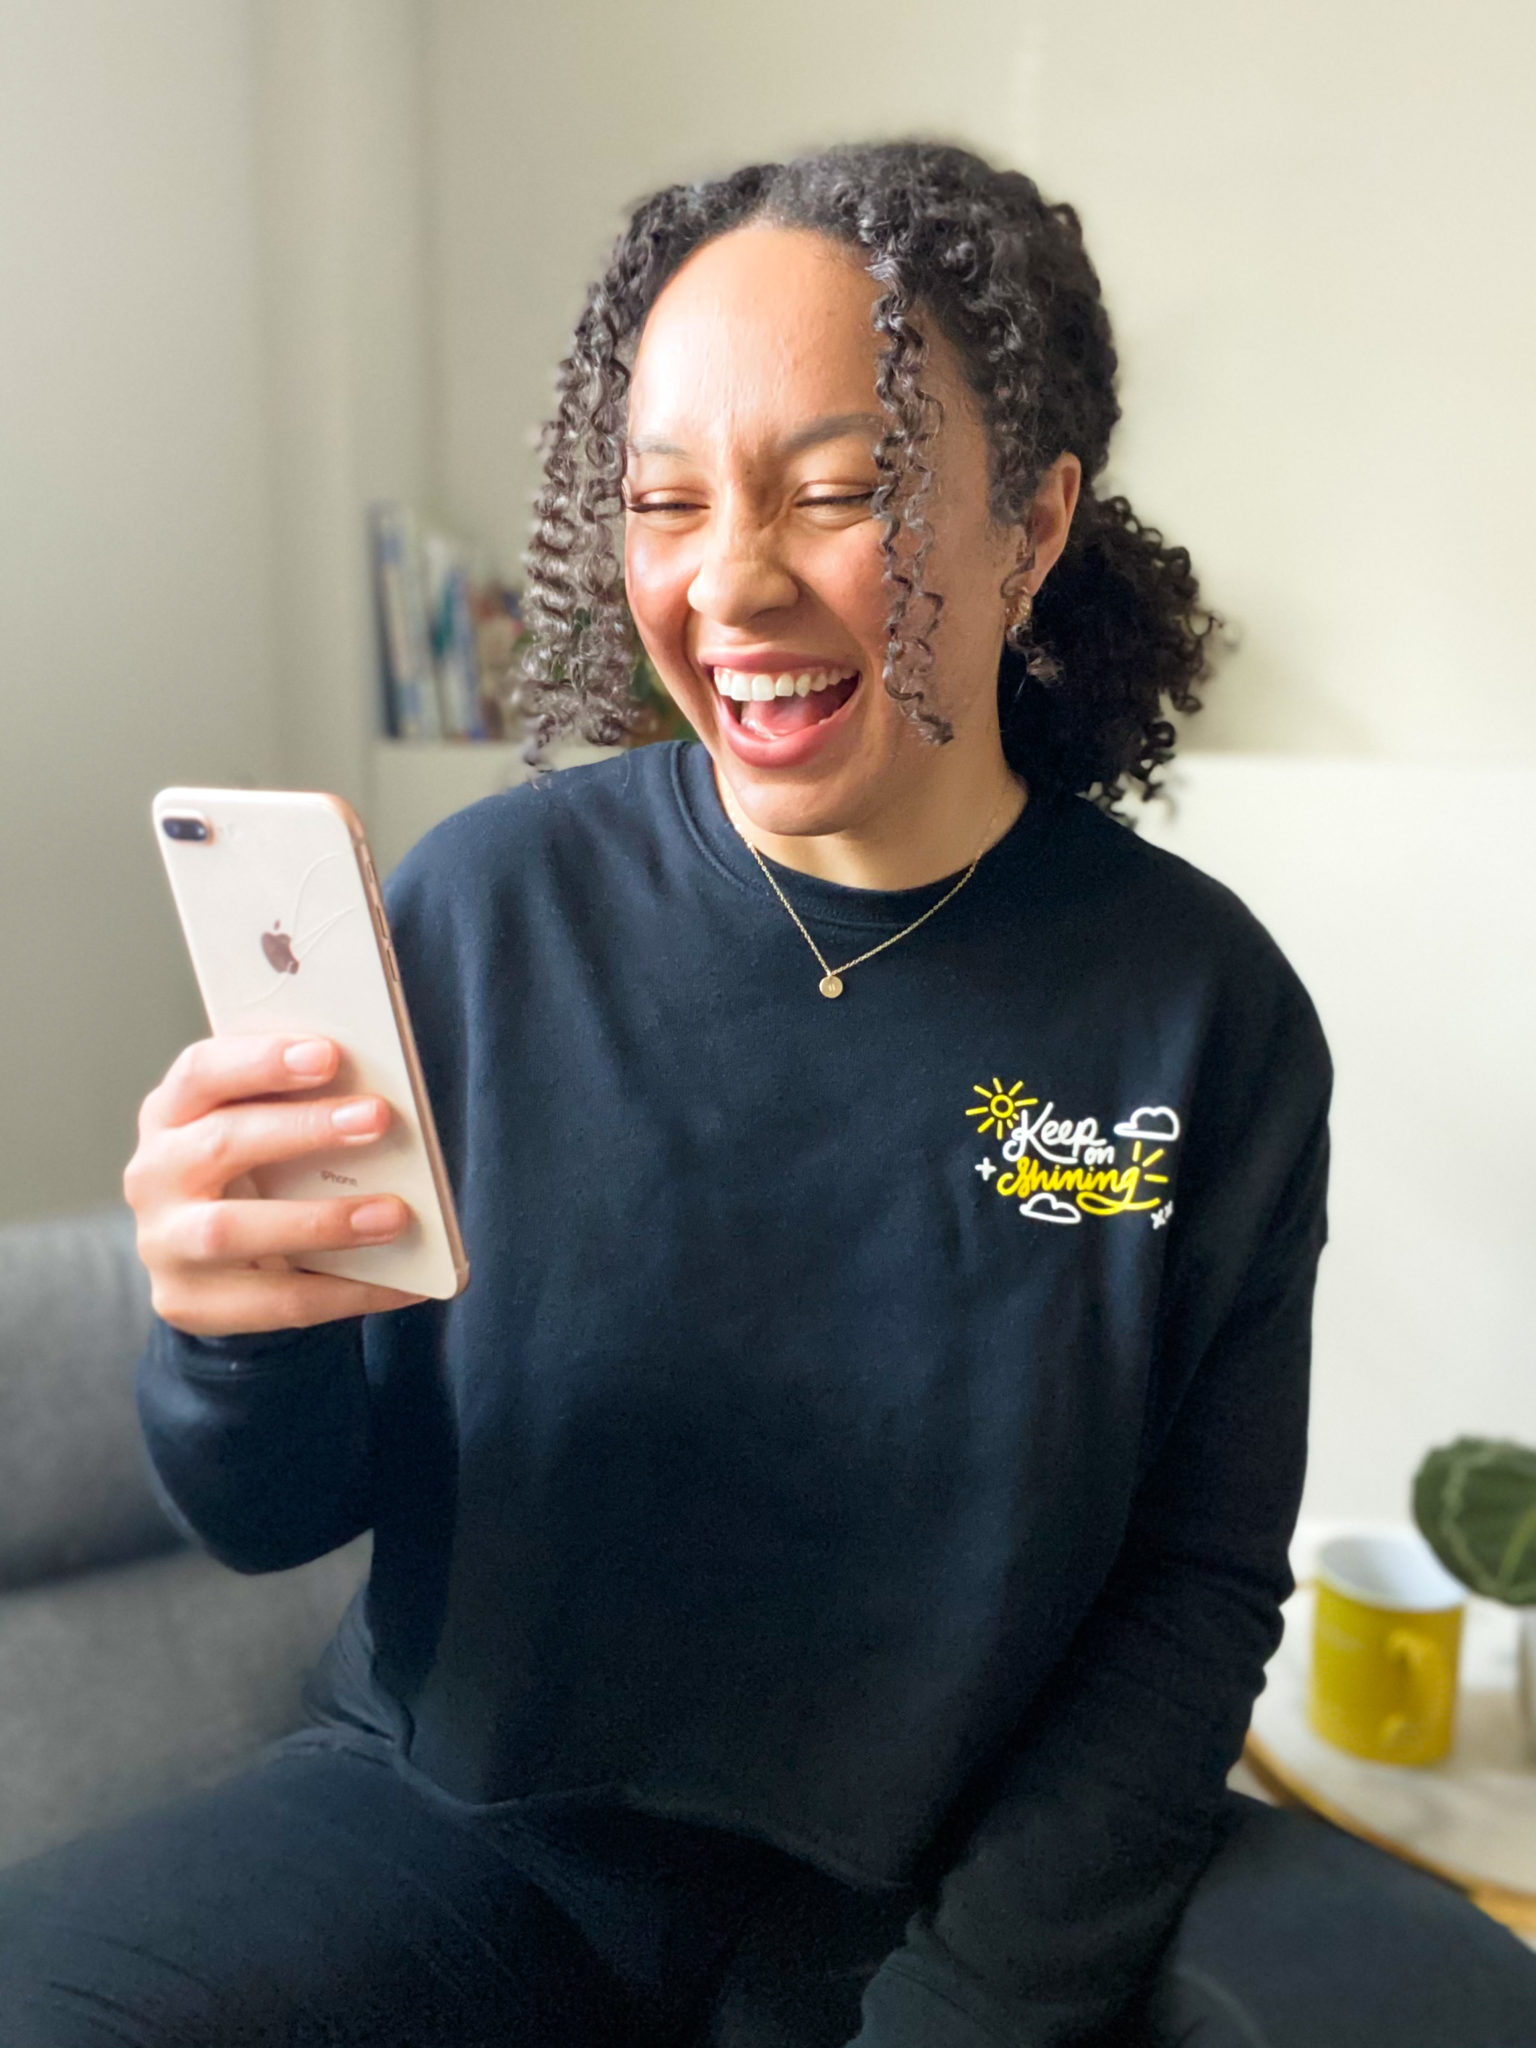 a woman smiles at her phone wearing a black custom sweatshirt with a yellow and white design that says Keep Smiling with a sun and clouds